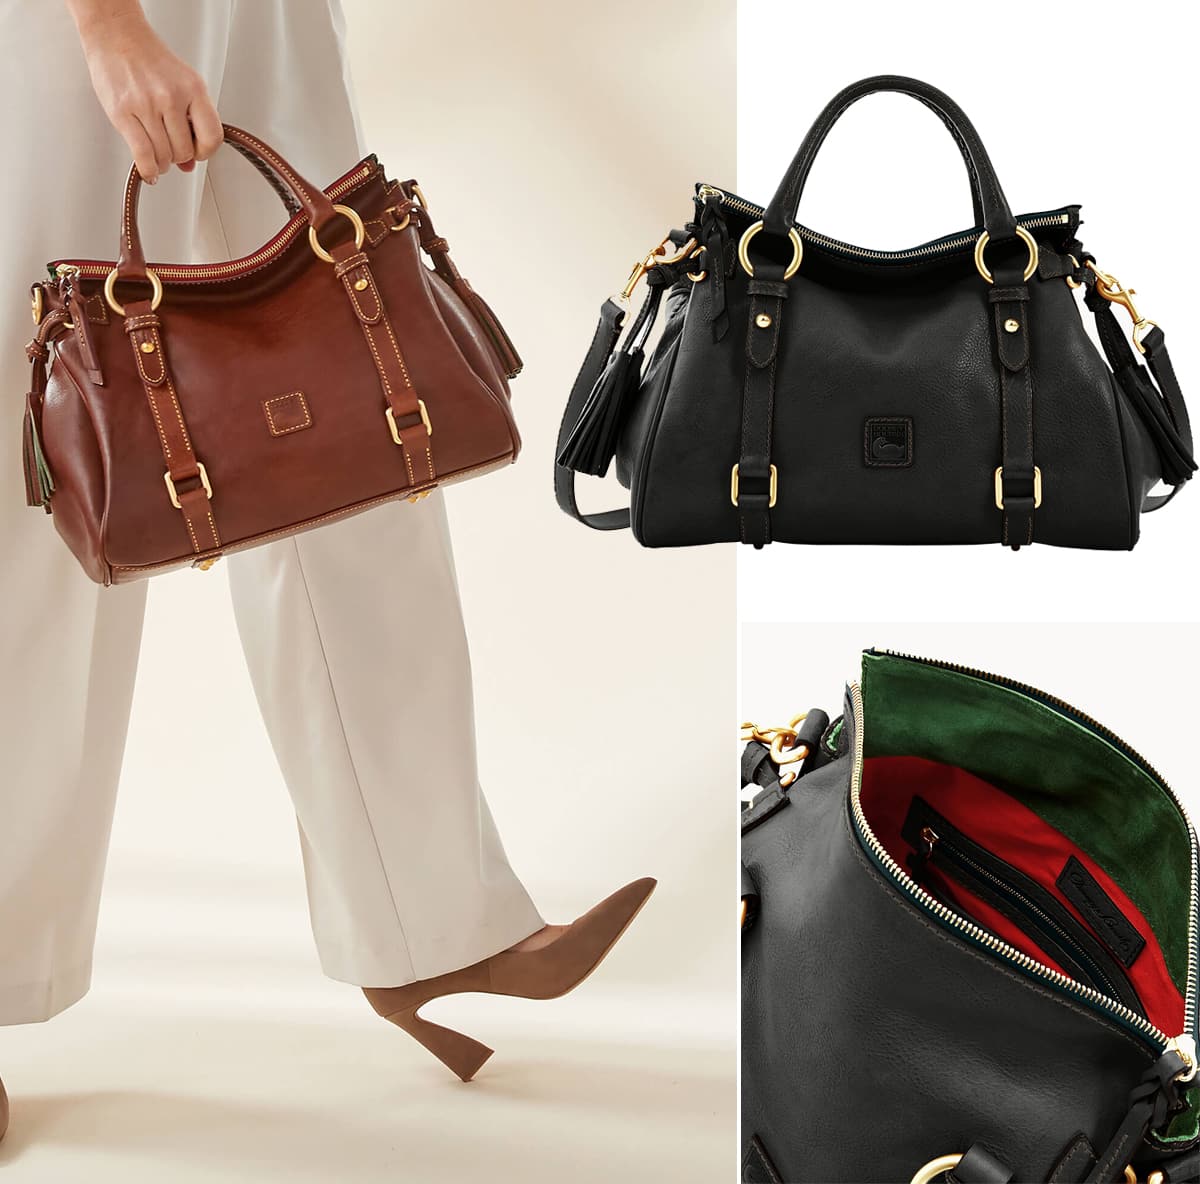 A Dooney original, the Florentine Satchel is a chic satchel made from Italian Vachetta leather that gets softer with age